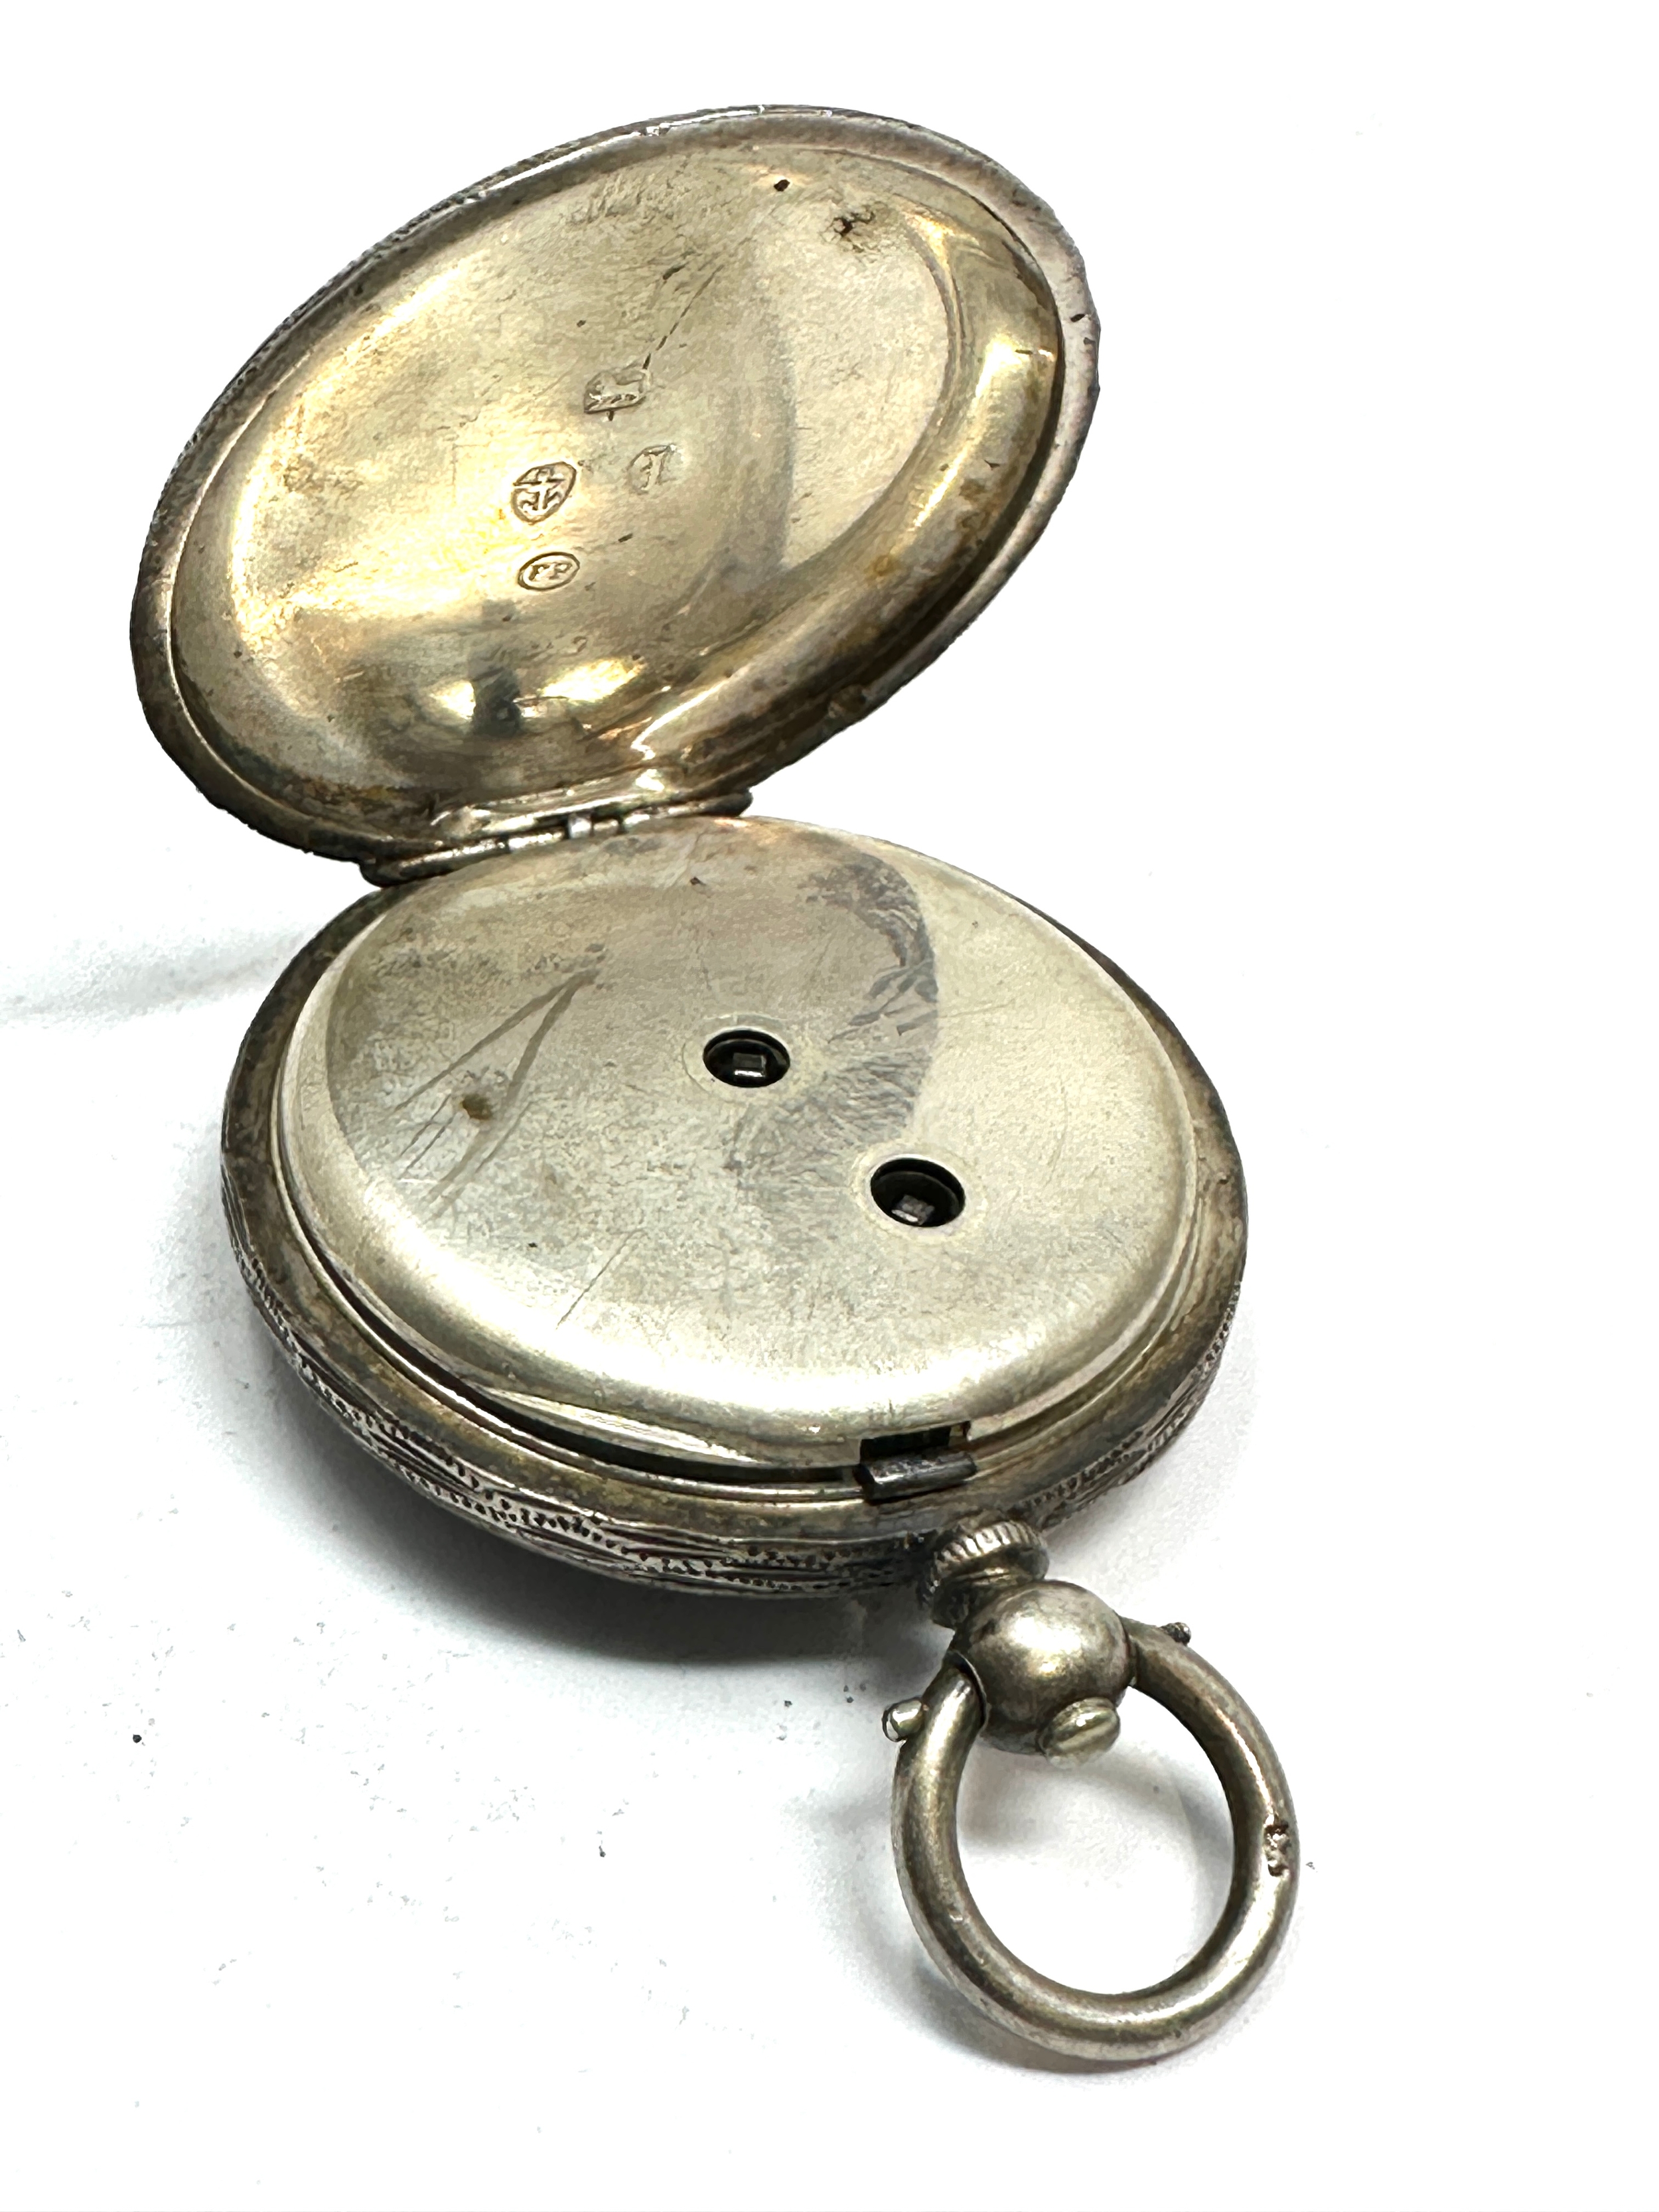 Antique silver fob watch the watch is not ticking - Image 3 of 4